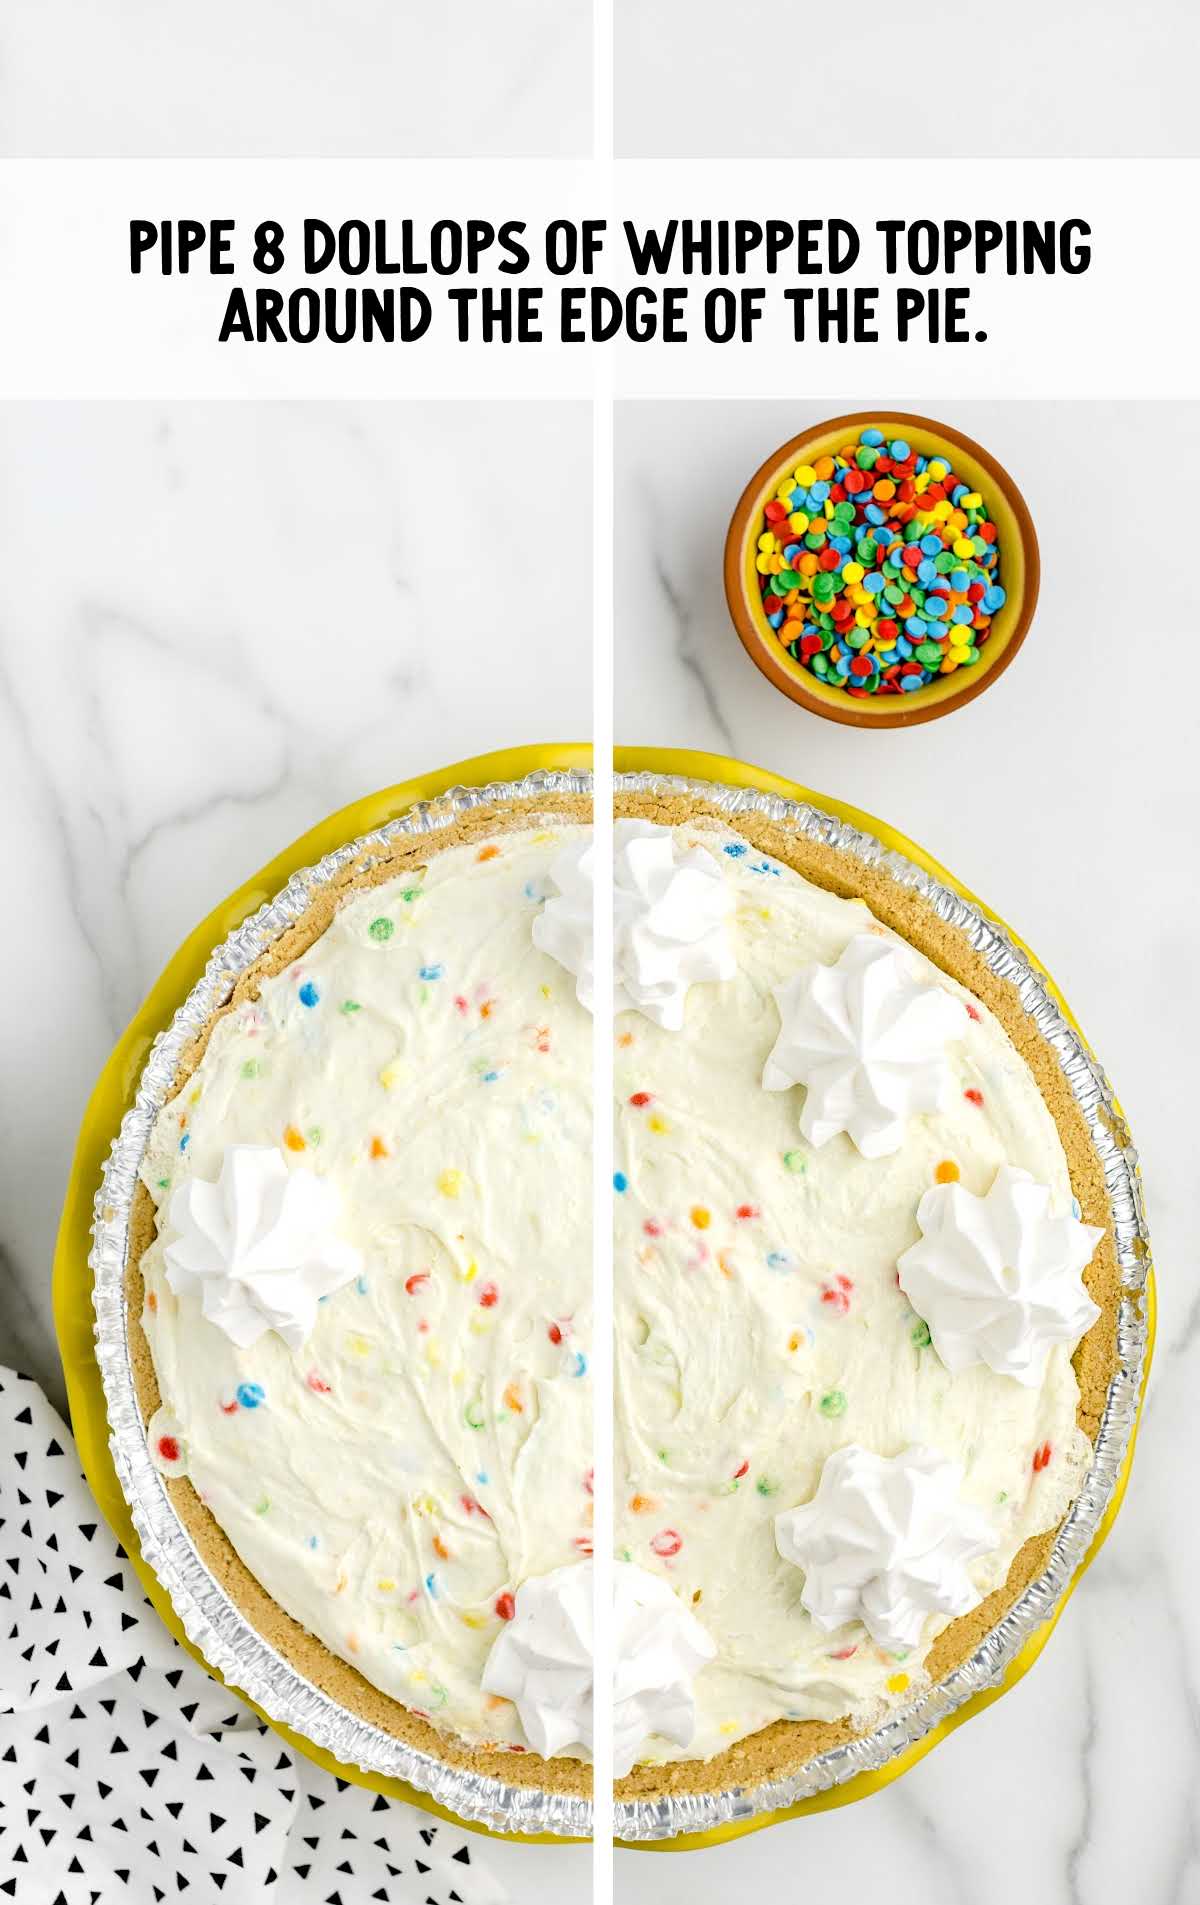 8 dollops of whipped topping around the edge of the pie